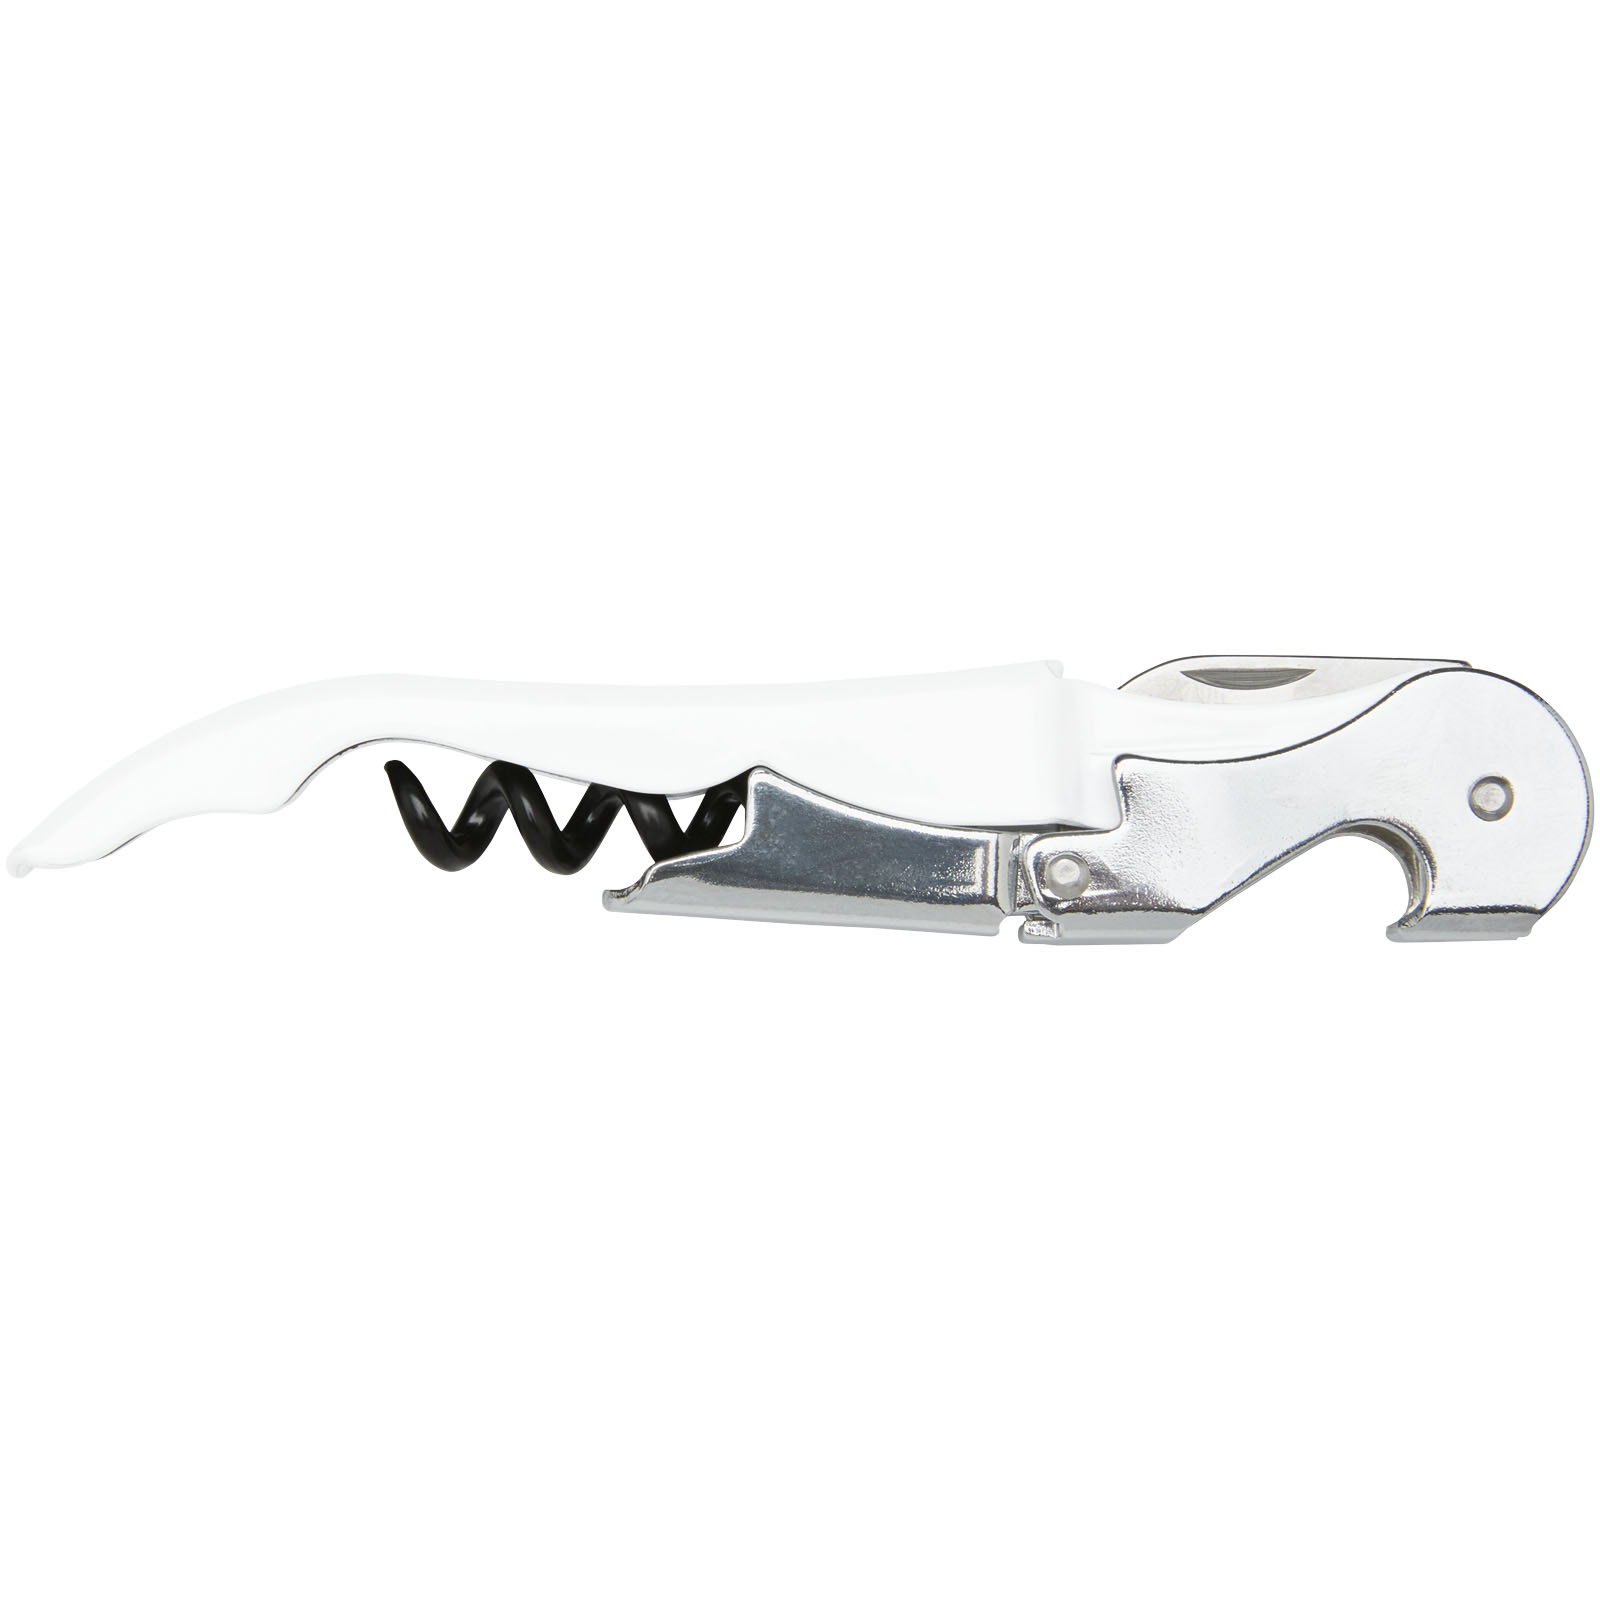 Advertising Wine Accessories - Foxy waitress knife - 2